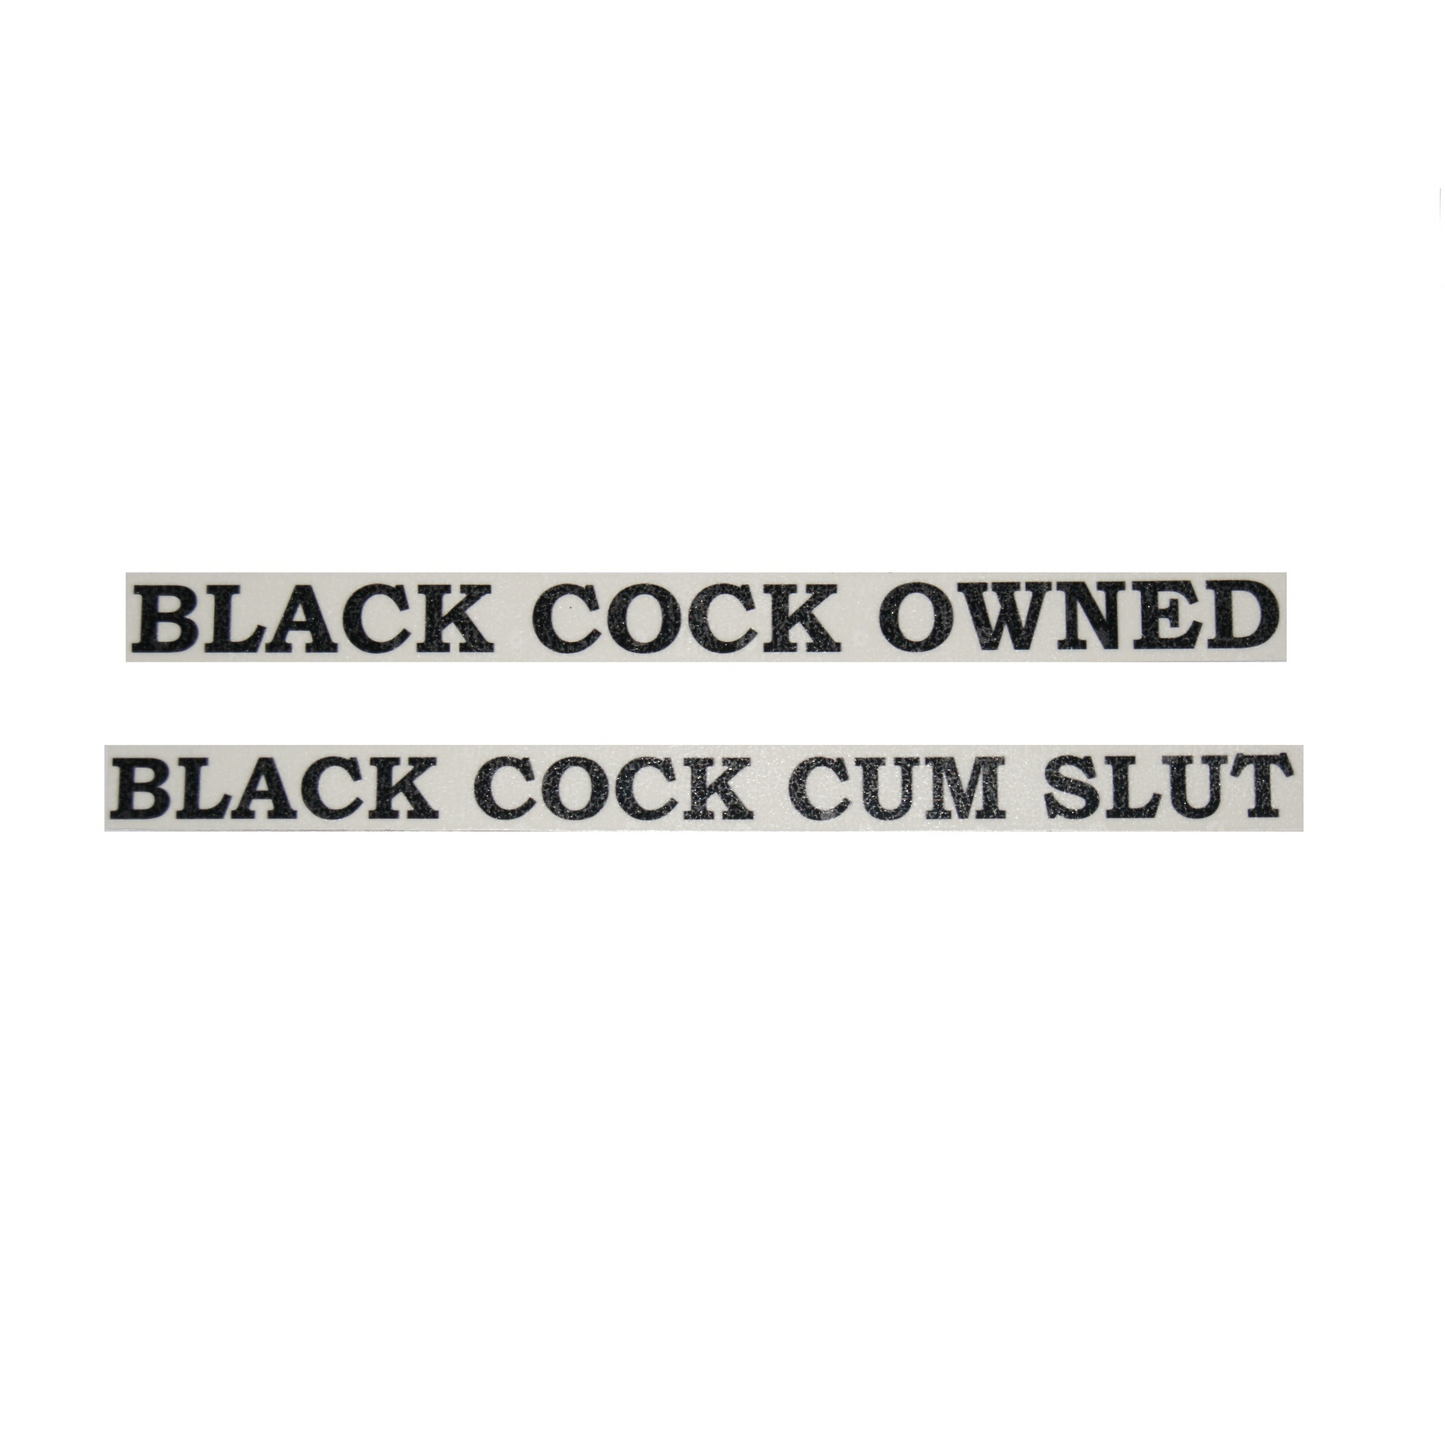 Temporary Tattoo - Black Cock Owned / Black Cock Cum Slut Lower Back or Stomach